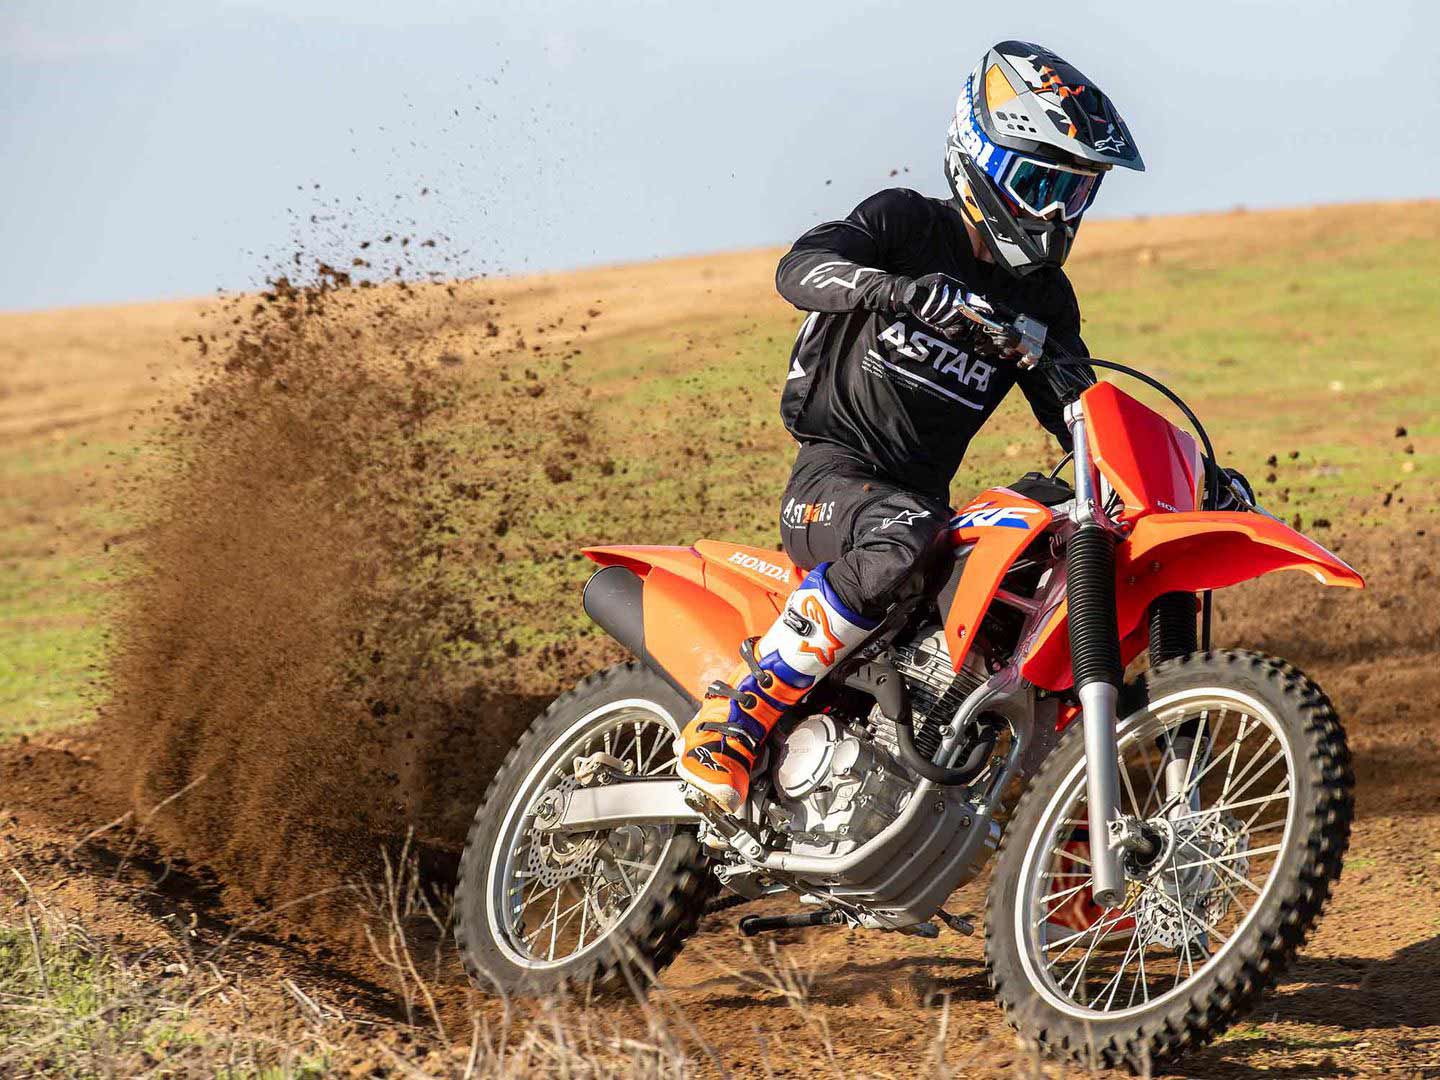 The CRF250F is all about flinging dirt, having fun, and growing skills.